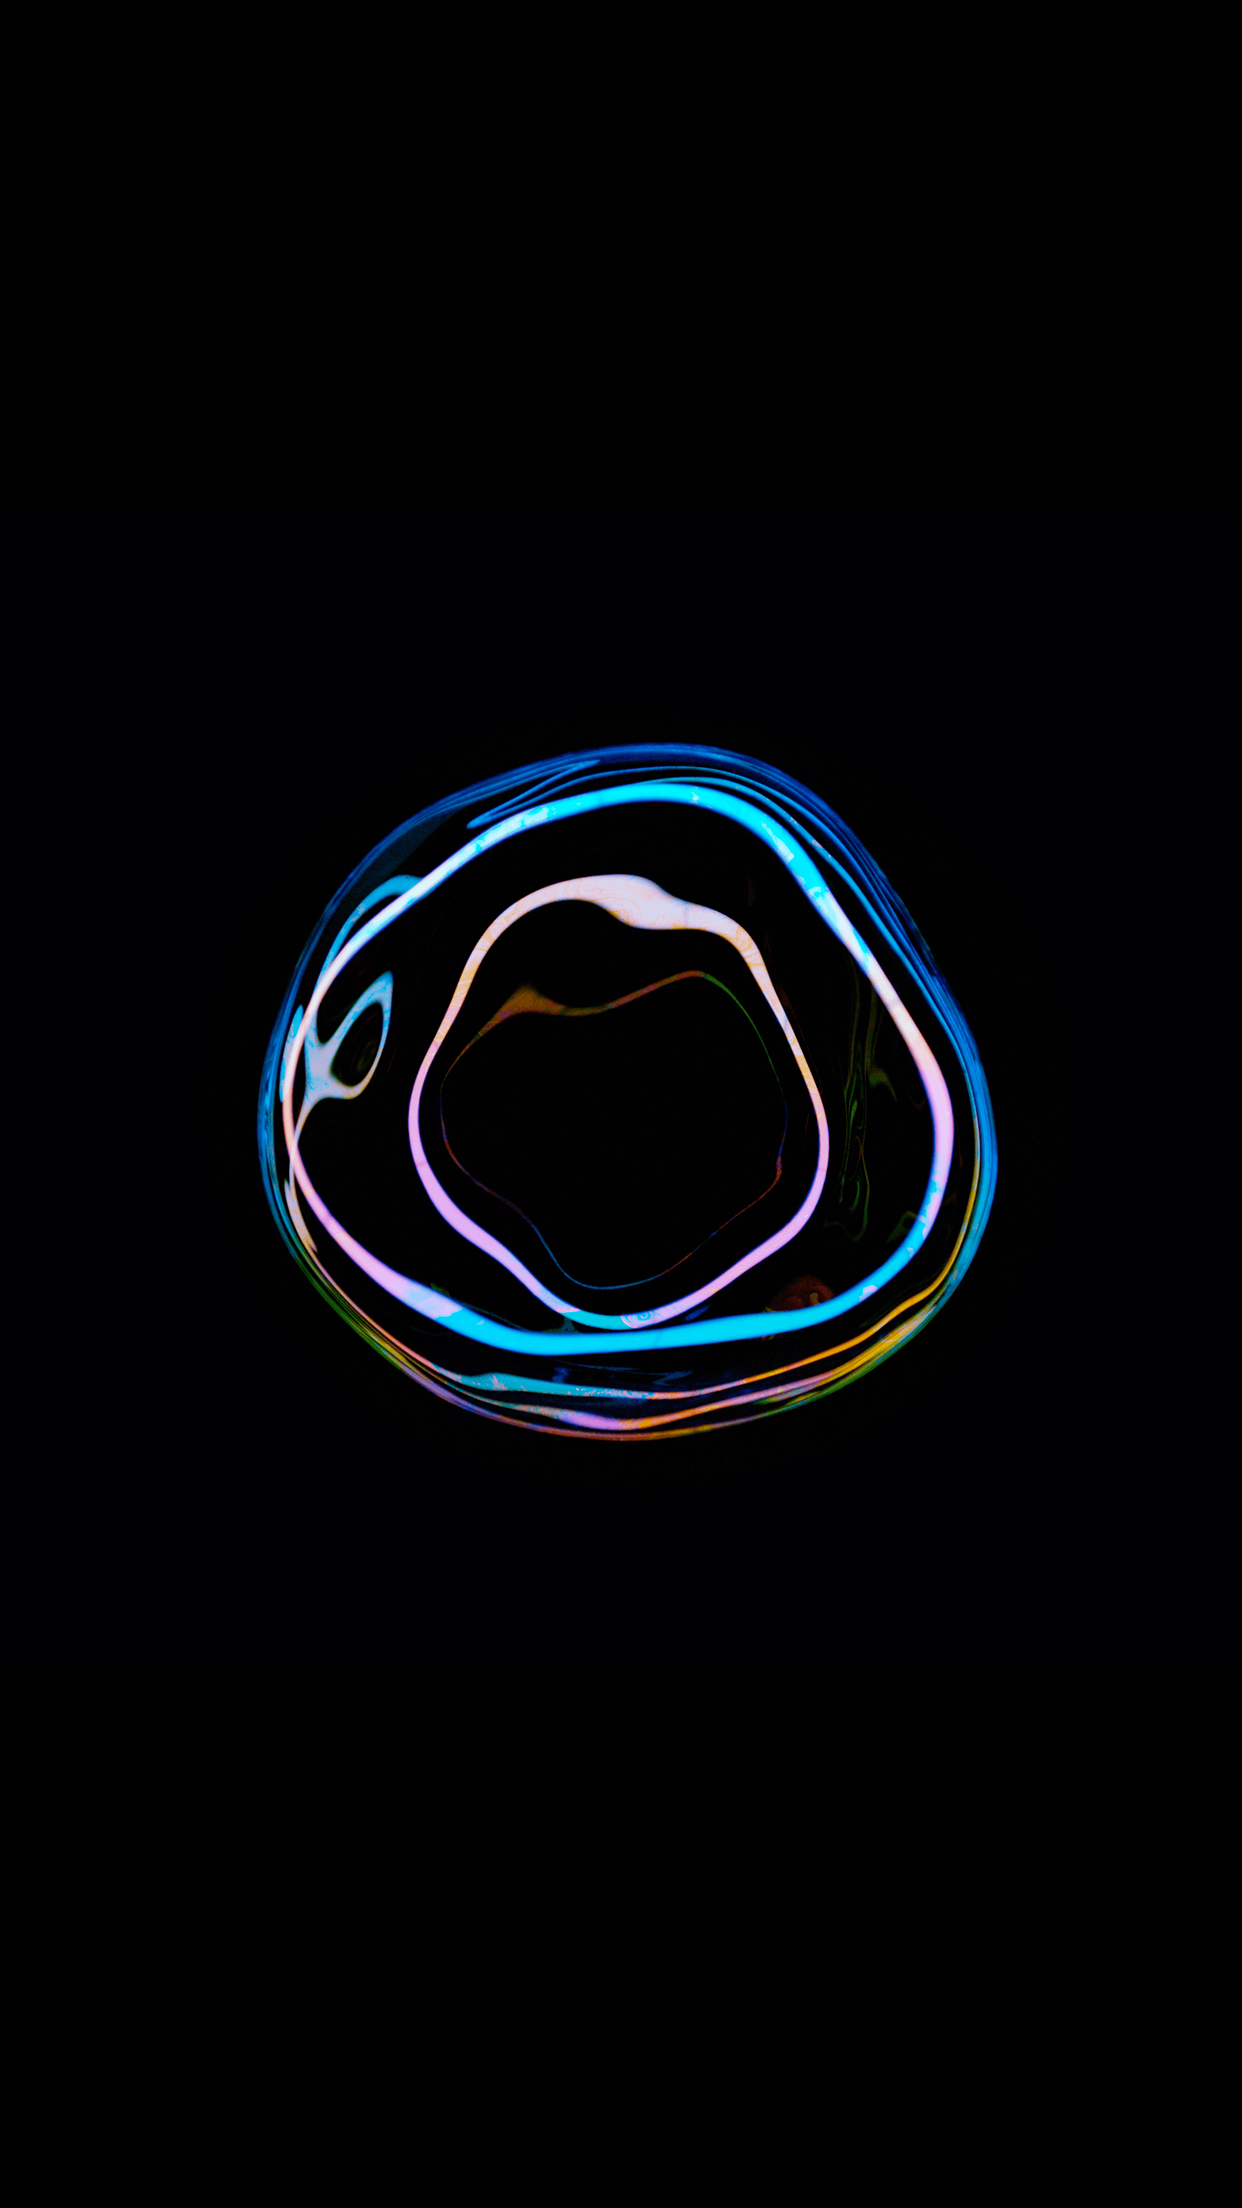 iphone wallpaper high quality,electric blue,font,neon,circle,graphics